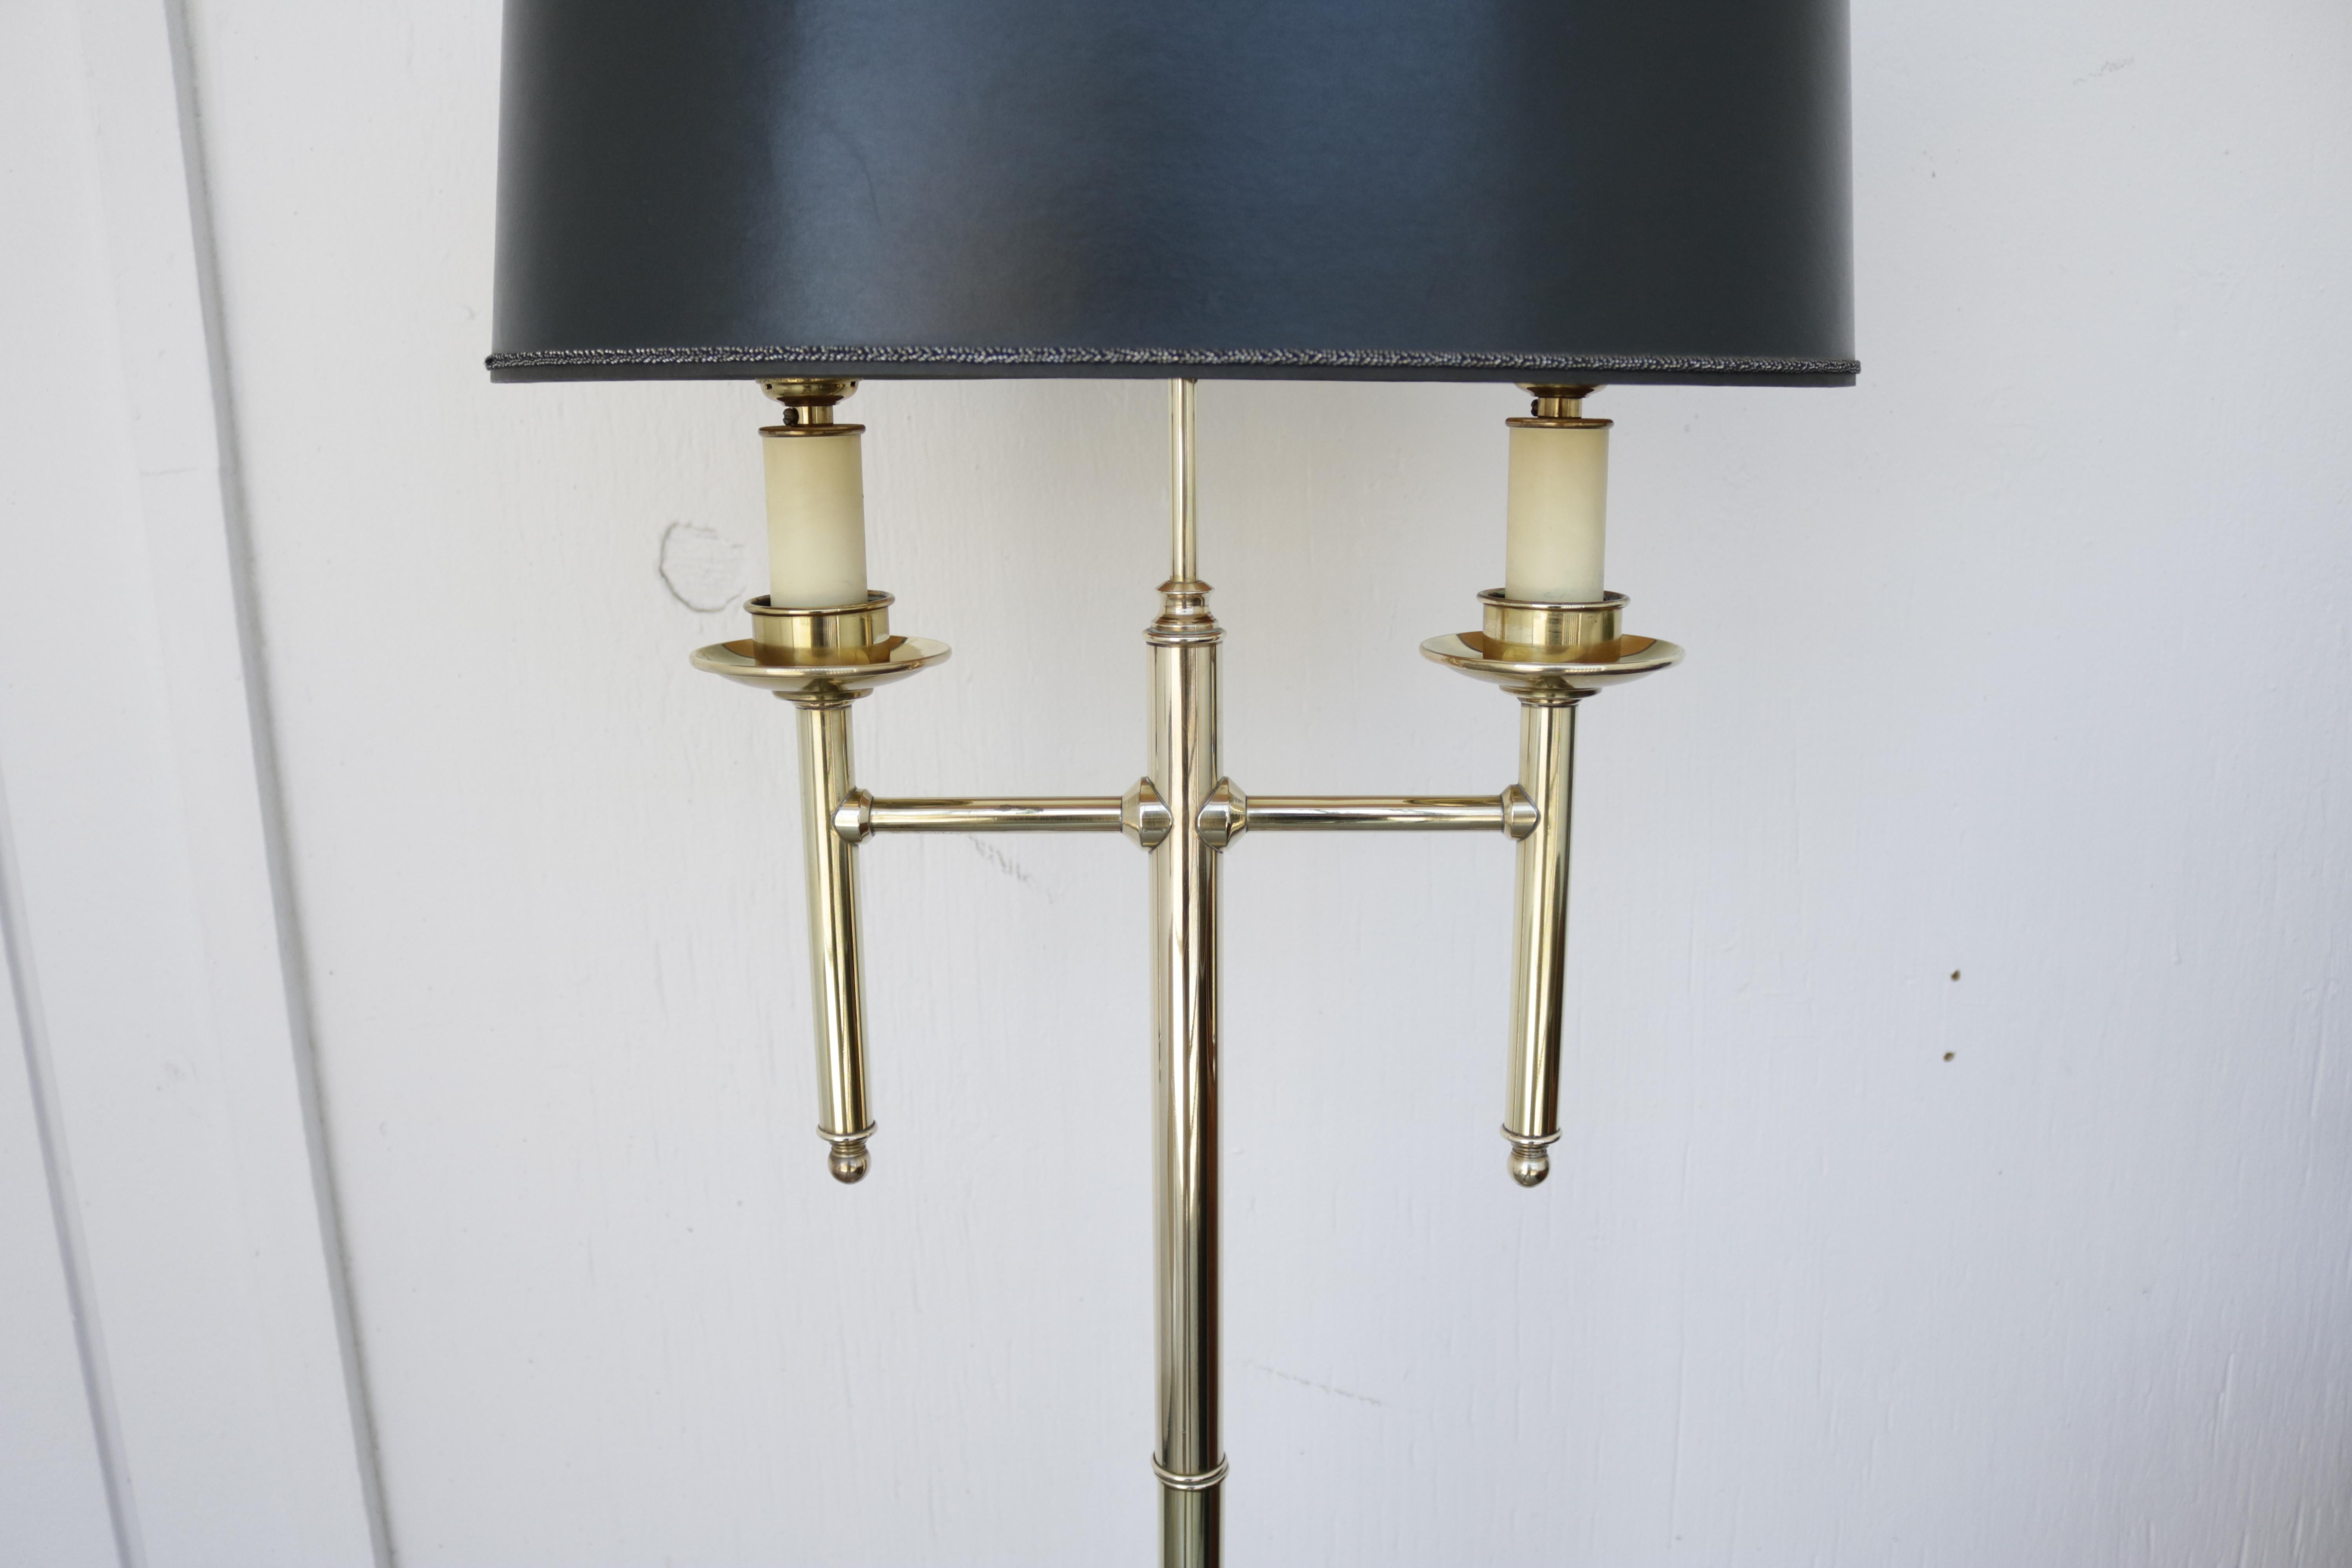 French floor lamp in brass with black ellipse shaped paper shade. Finial has a brass ring design on top. Two sockets.